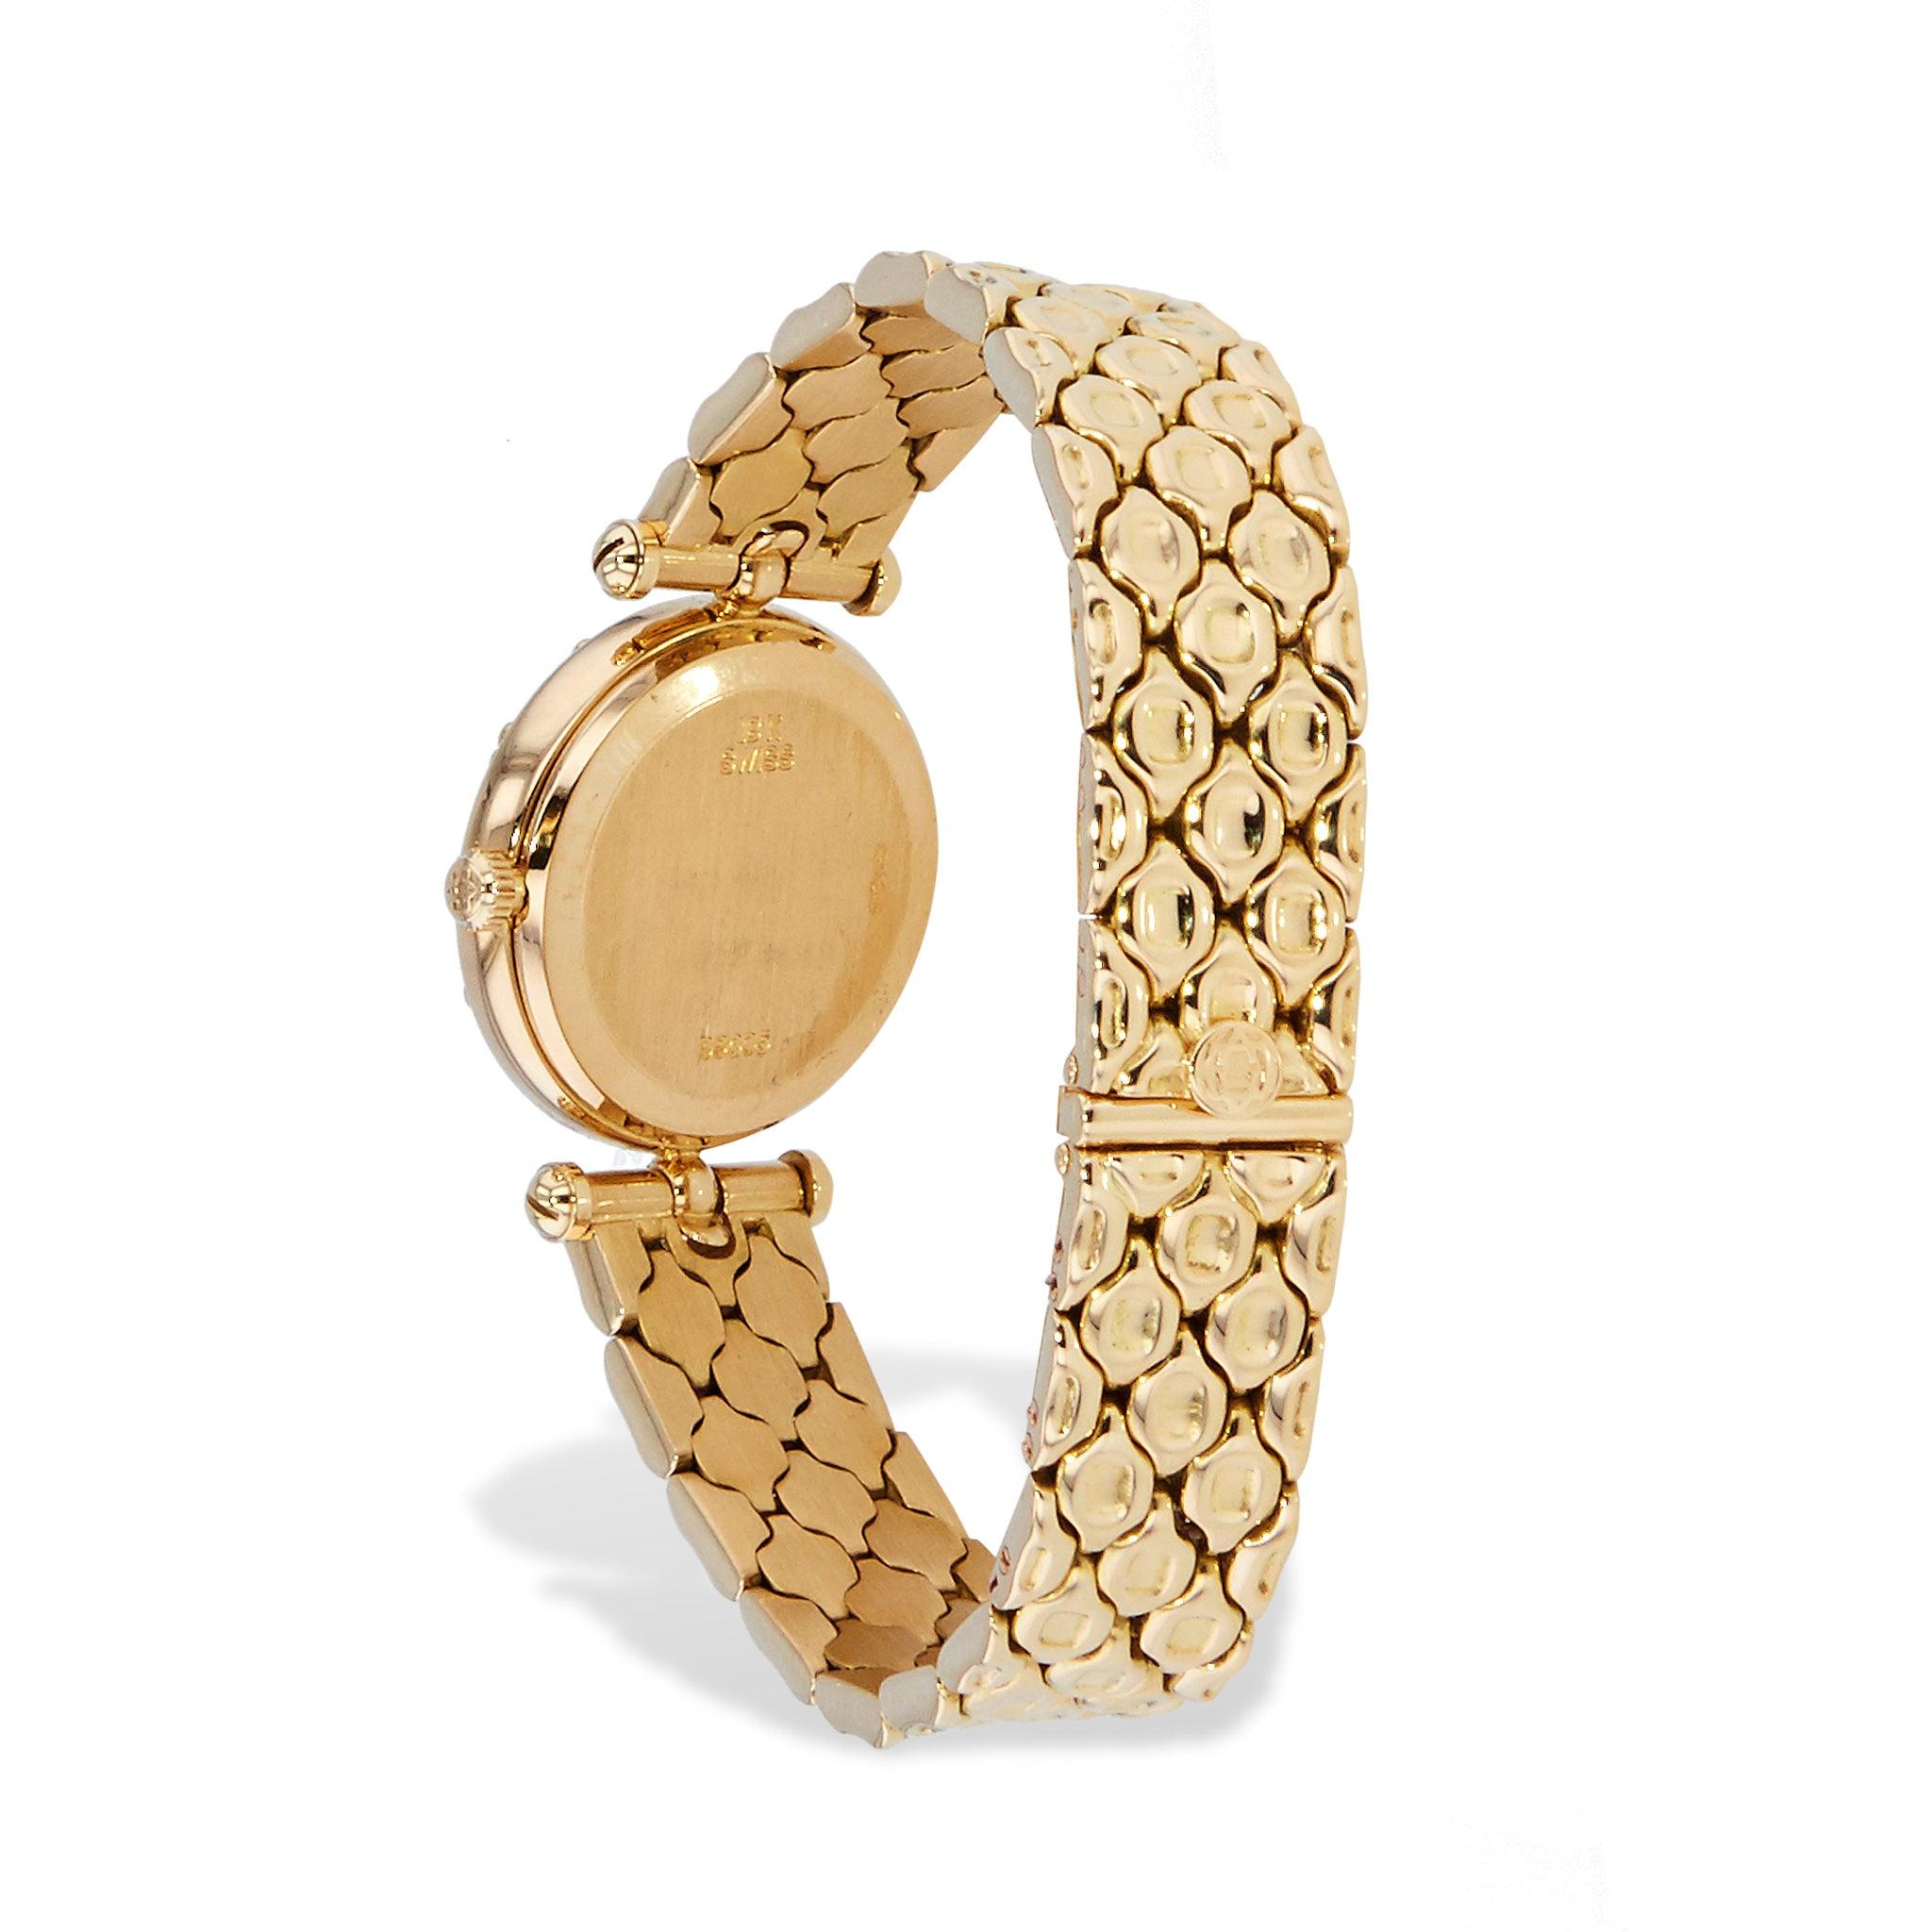 This luxury timepiece from Van Cleef & Arpels is a timeless addition to any wardrobe. It's crafted from 18kt yellow gold and features a sleek design with an 18 kt. yellow gold bracelet.  
Van Cleef & Arpels Yellow Gold 
White Diamonds Collection